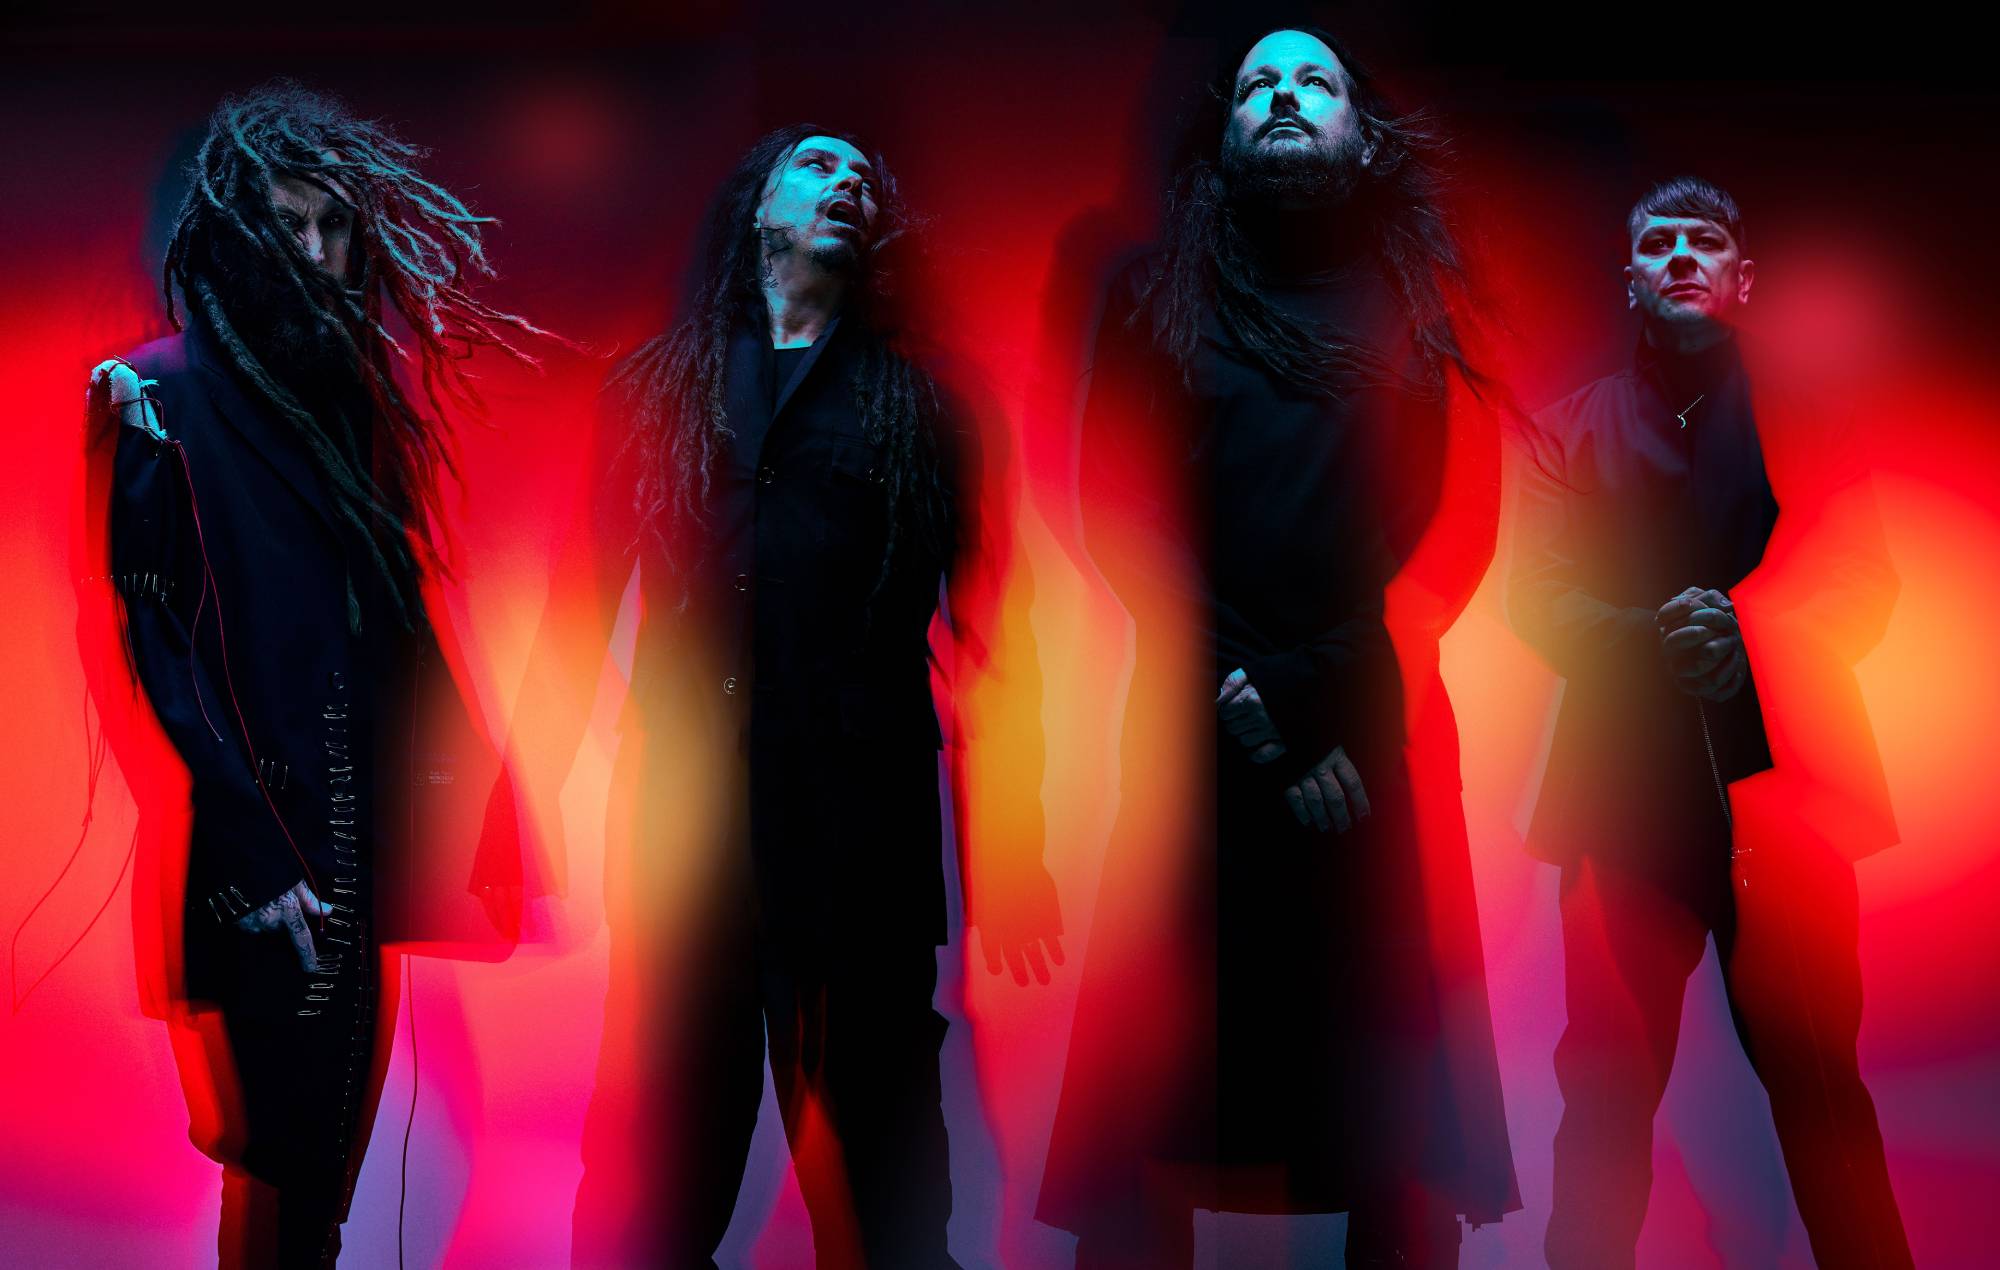 Korn: “On this record, we have grown emotionally. Music is healing to all of us”